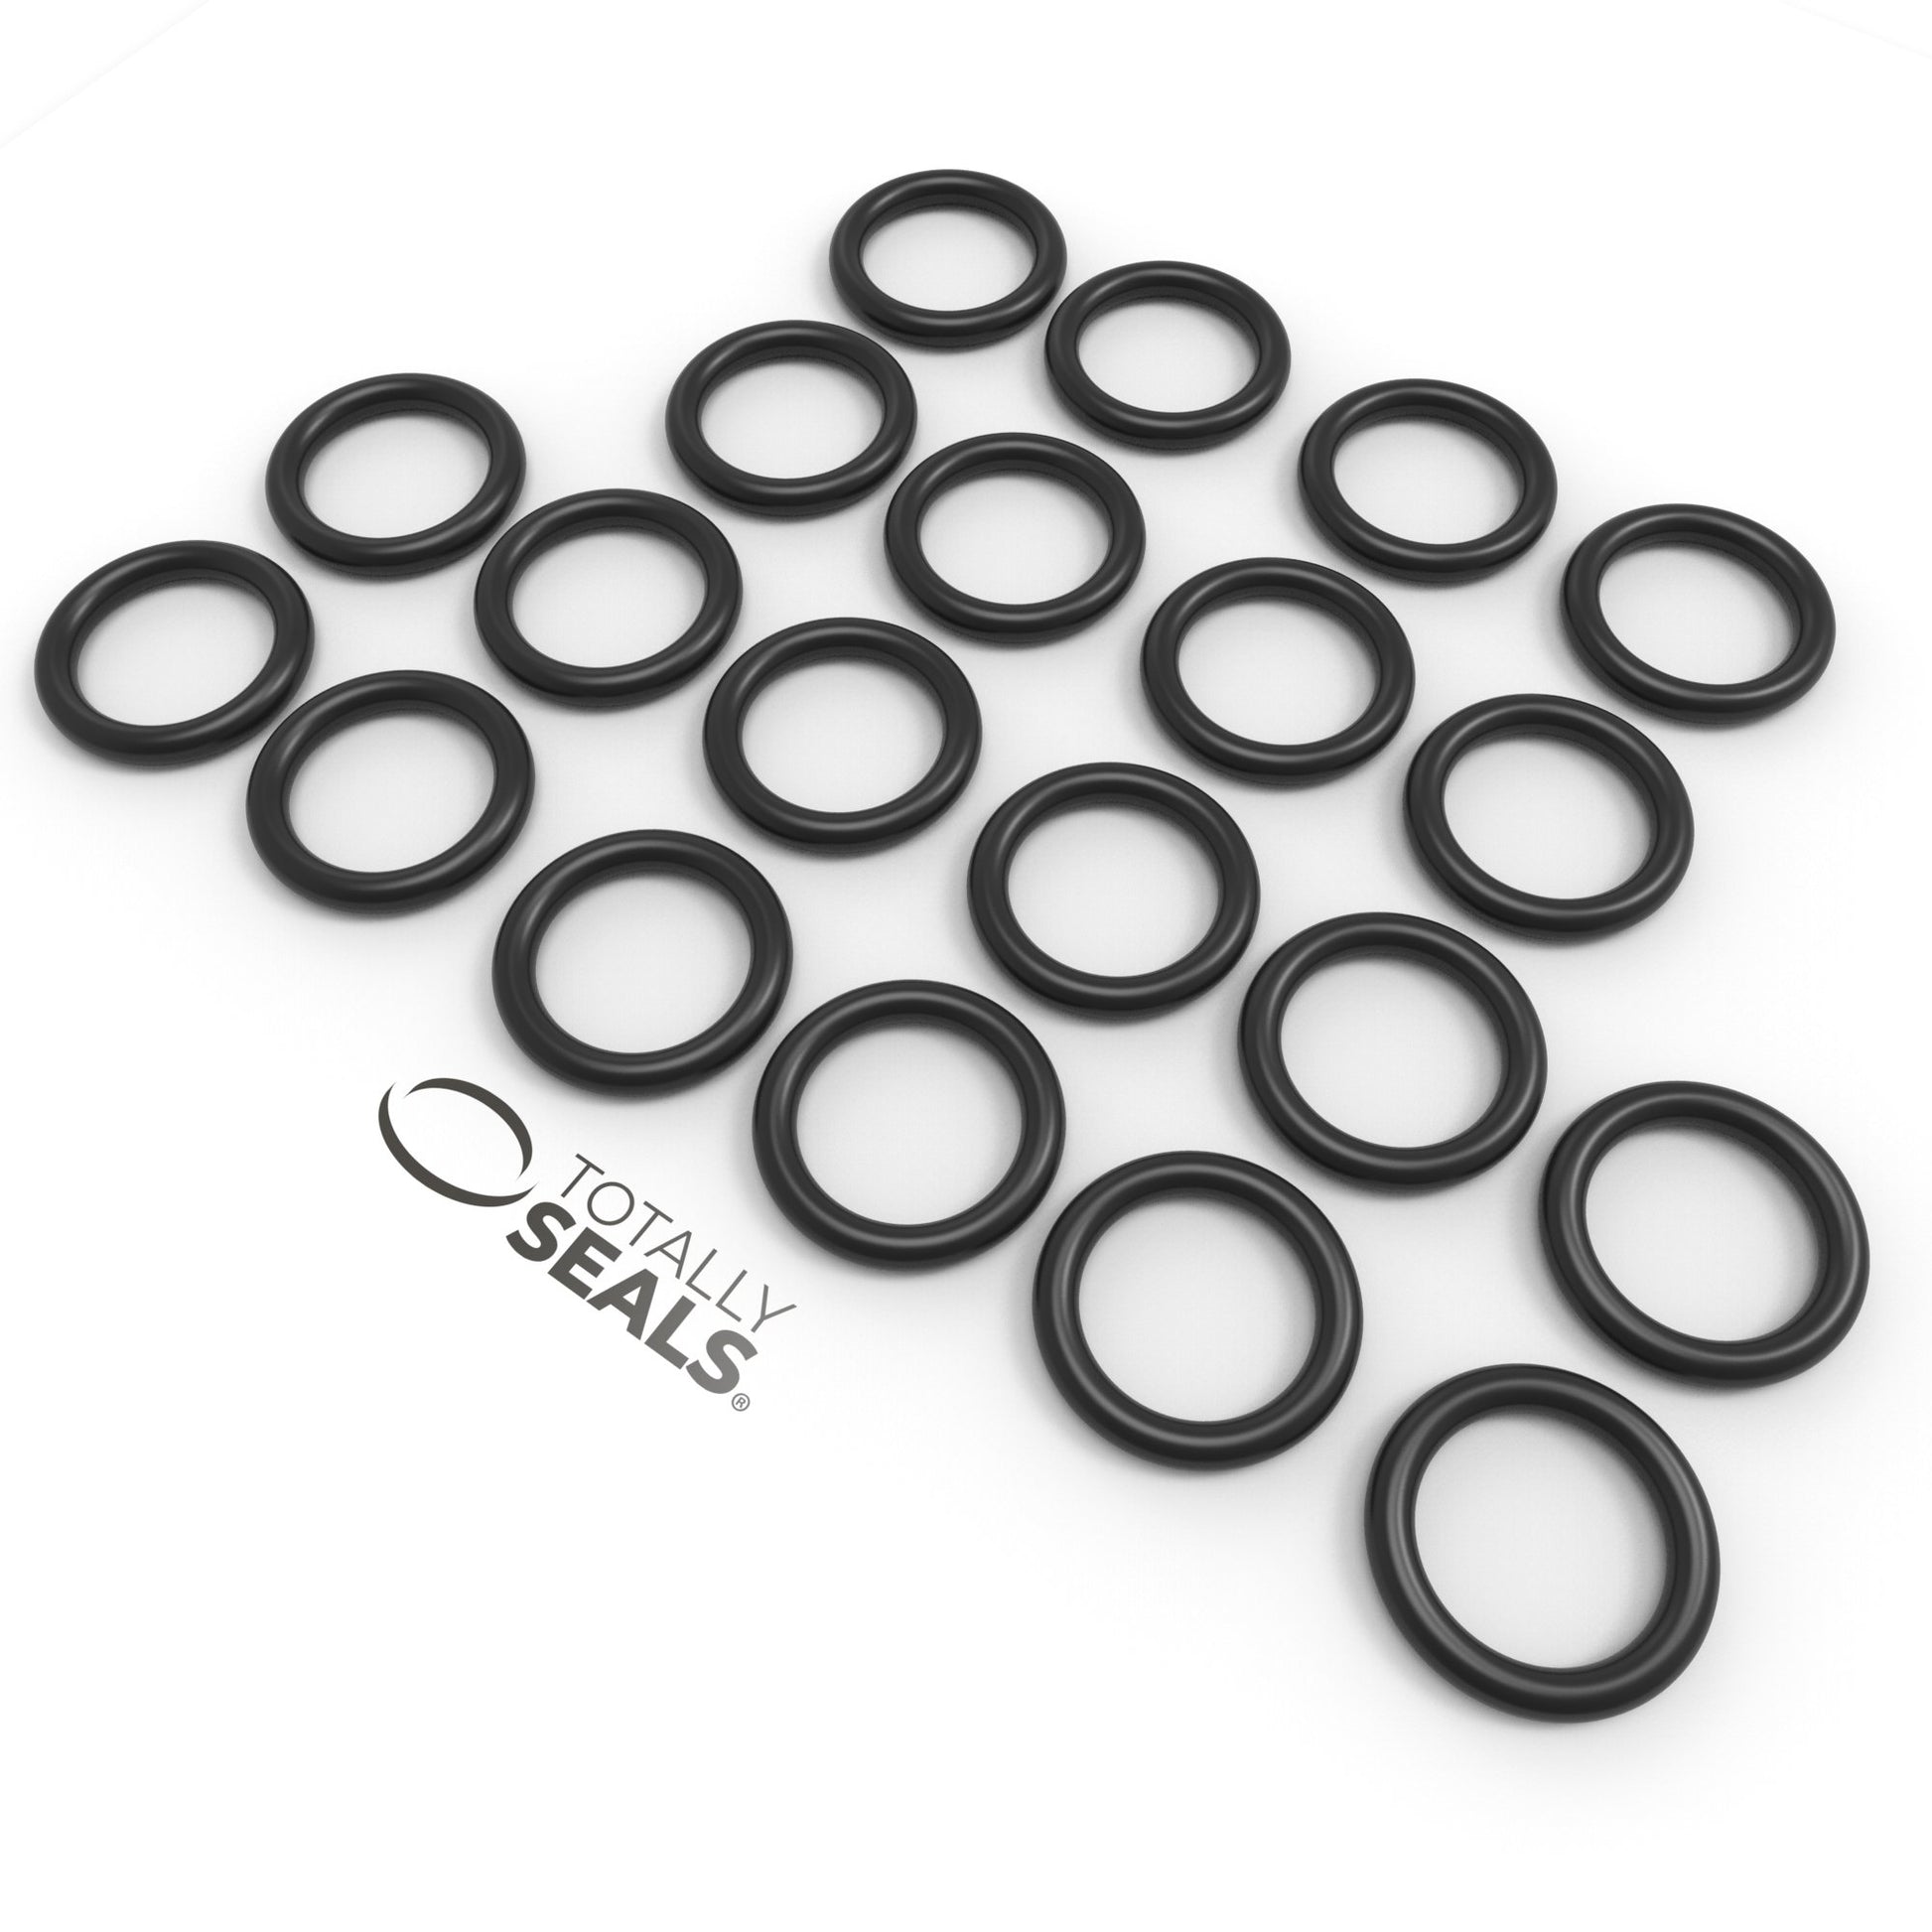 1/2" x 3/32" (BS112) Imperial Nitrile O-Rings - Totally Seals®